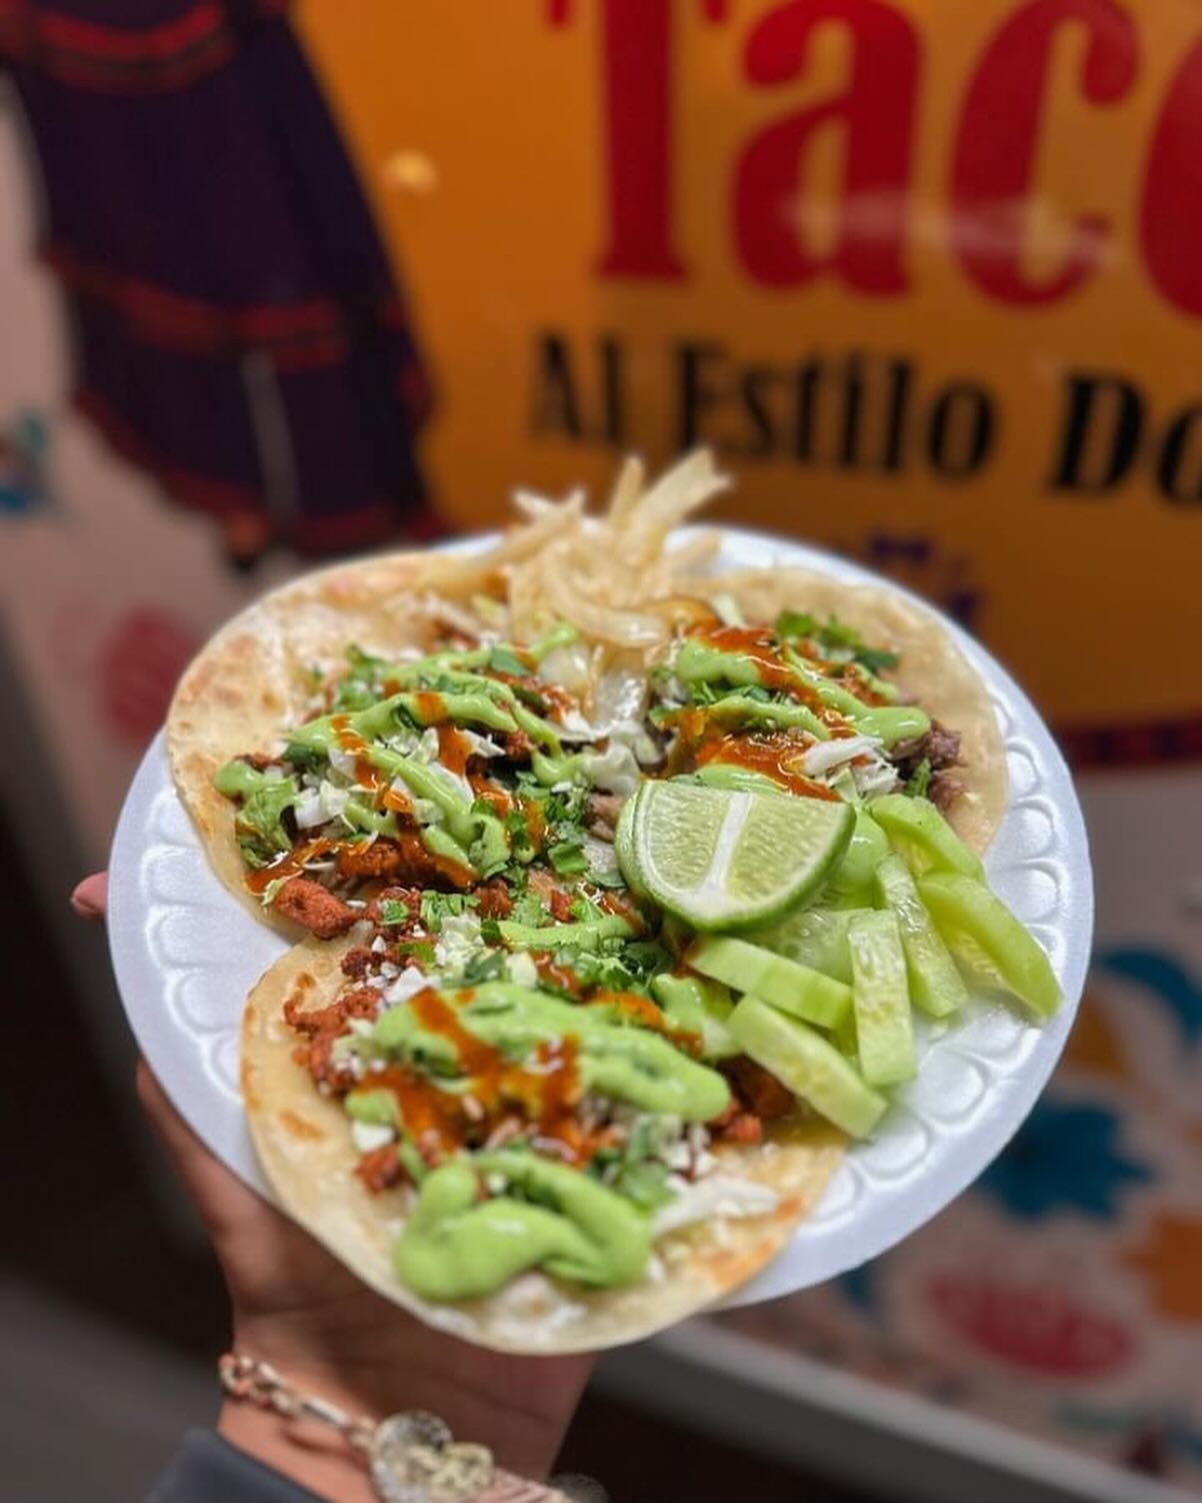 🌮🌮 NEW TACO TRUCK TONIGHT 🌮🌮

Taco &lsquo;bout an excellent way to spend your Friday night! Come welcome @_doritastacos at the taproom tonight from 6:00 PM - 1:00 AM

Nothing like some cerveza and tacos to kick off your weekend! Let&rsquo;s get i